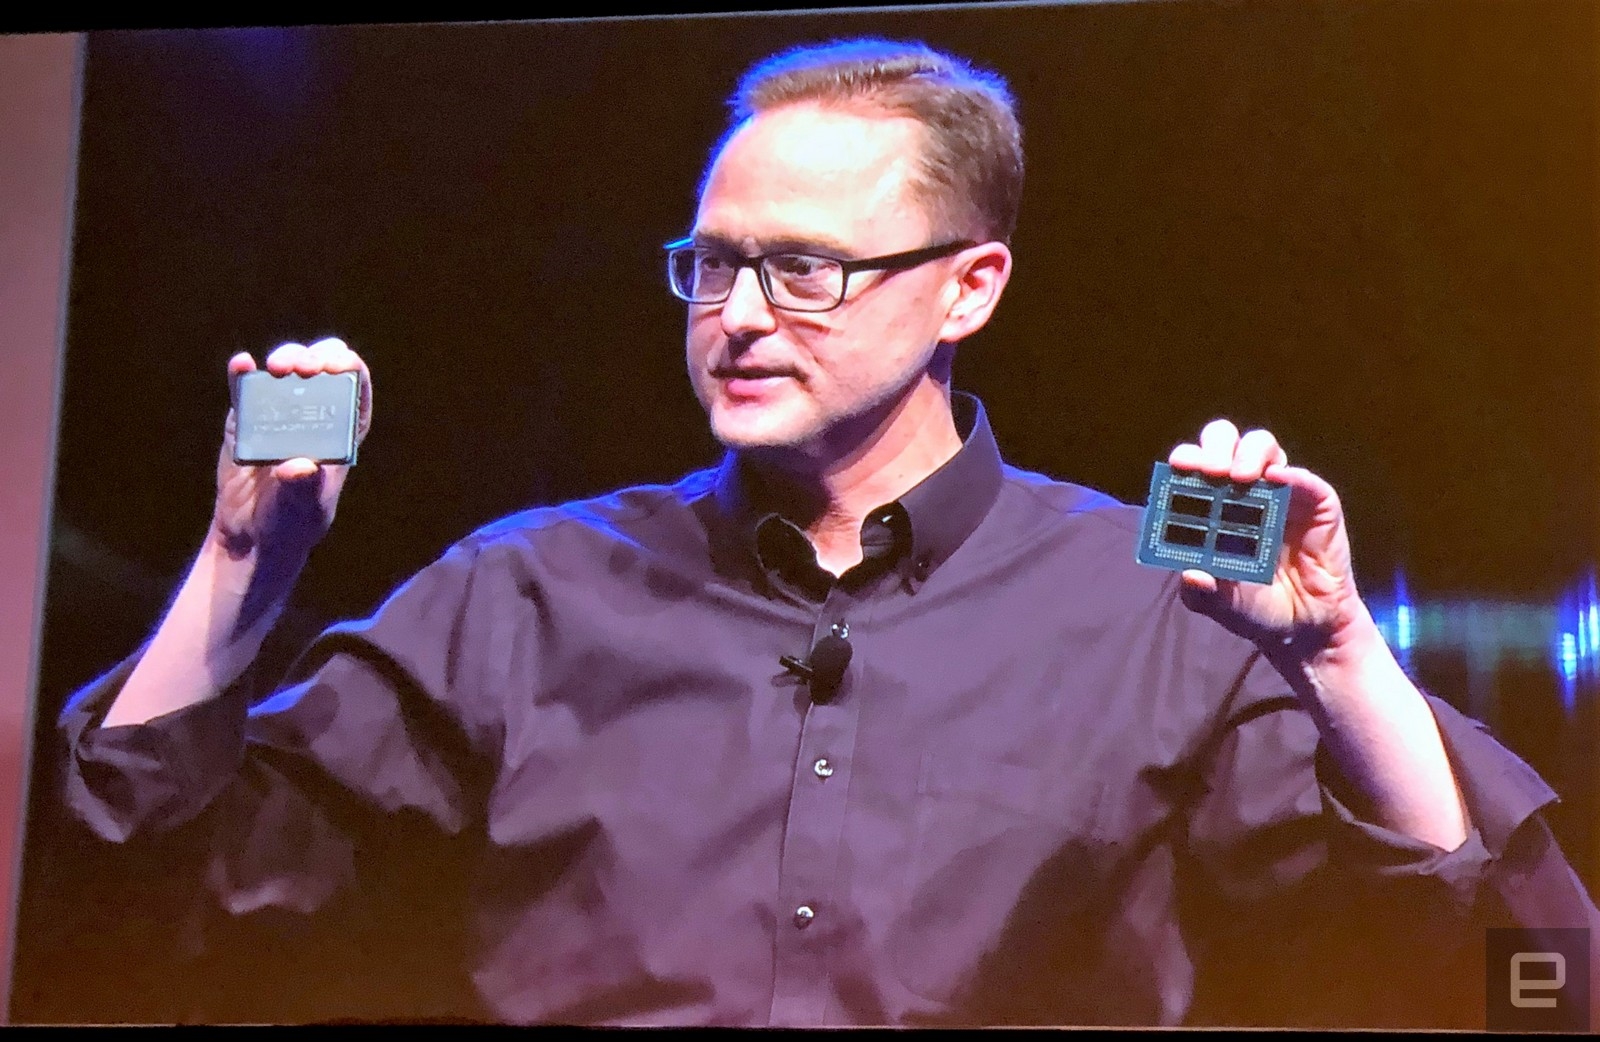 AMD's second-generation Threadripper CPU has up to 32 cores | DeviceDaily.com